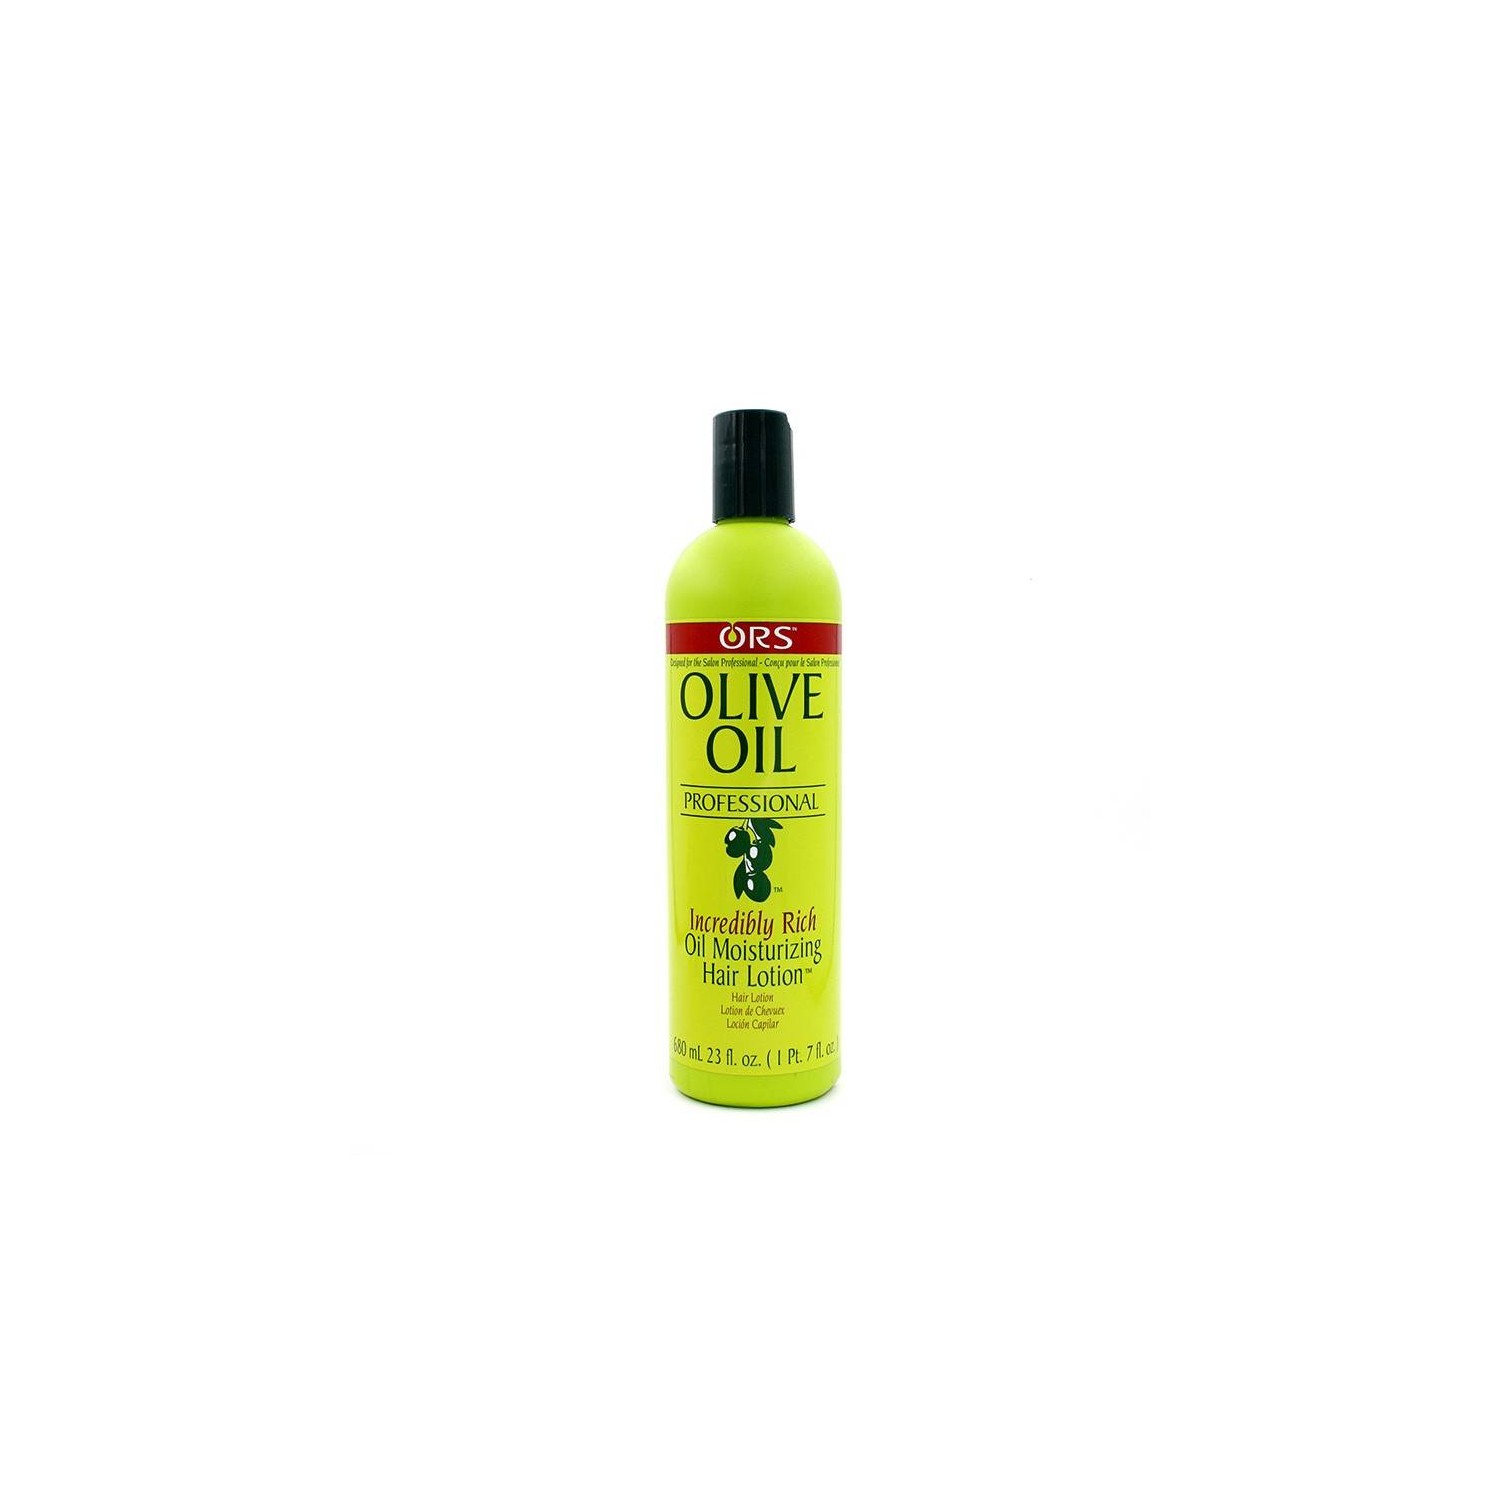 Ors Olive Oil Hydratant Cheveux Lotion 680 ml